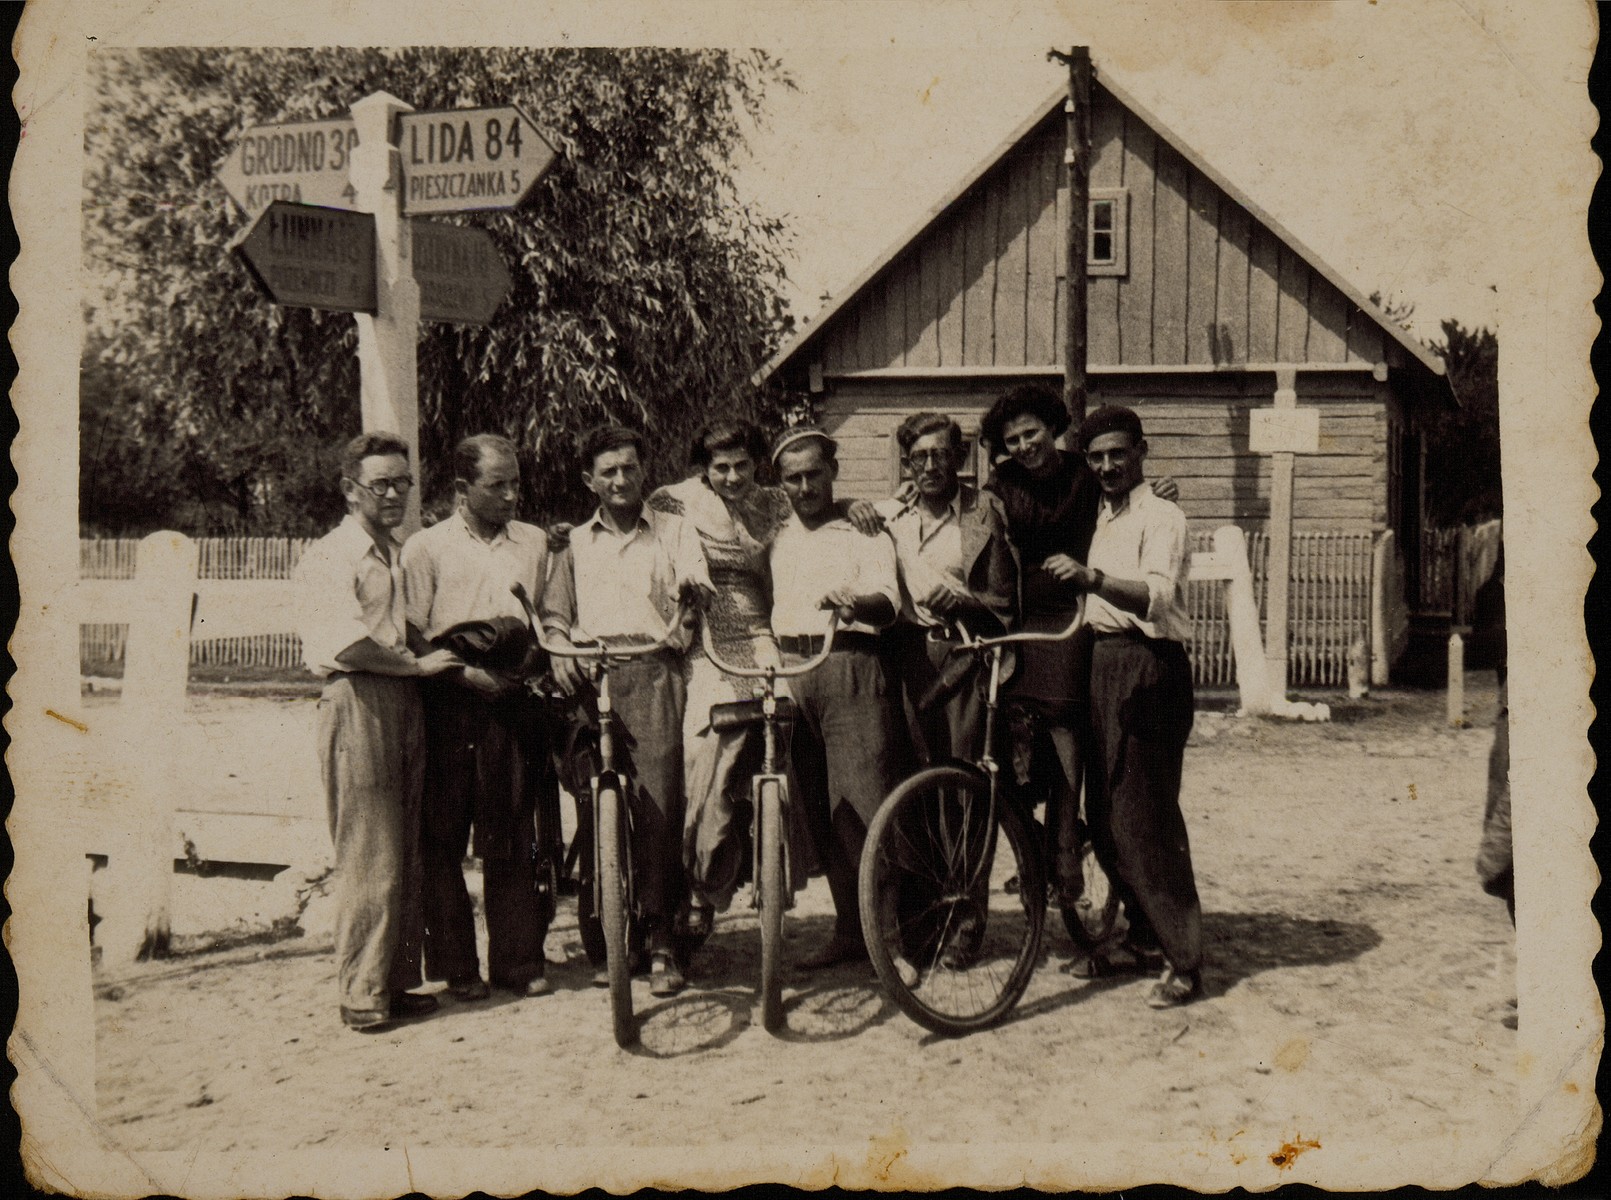 Winners of a bicycle race sponsored by local Zionist groups pose with their bicycles, next to a road sign in the village of Skidel.

Among those pictured is Shabbtai (Shepske) Sonenson (third from the left), who represented the Betar organization in Eisiskes.  Shepske was killed by the Germans during the September 1941 mass shooting action in Eisiskes.